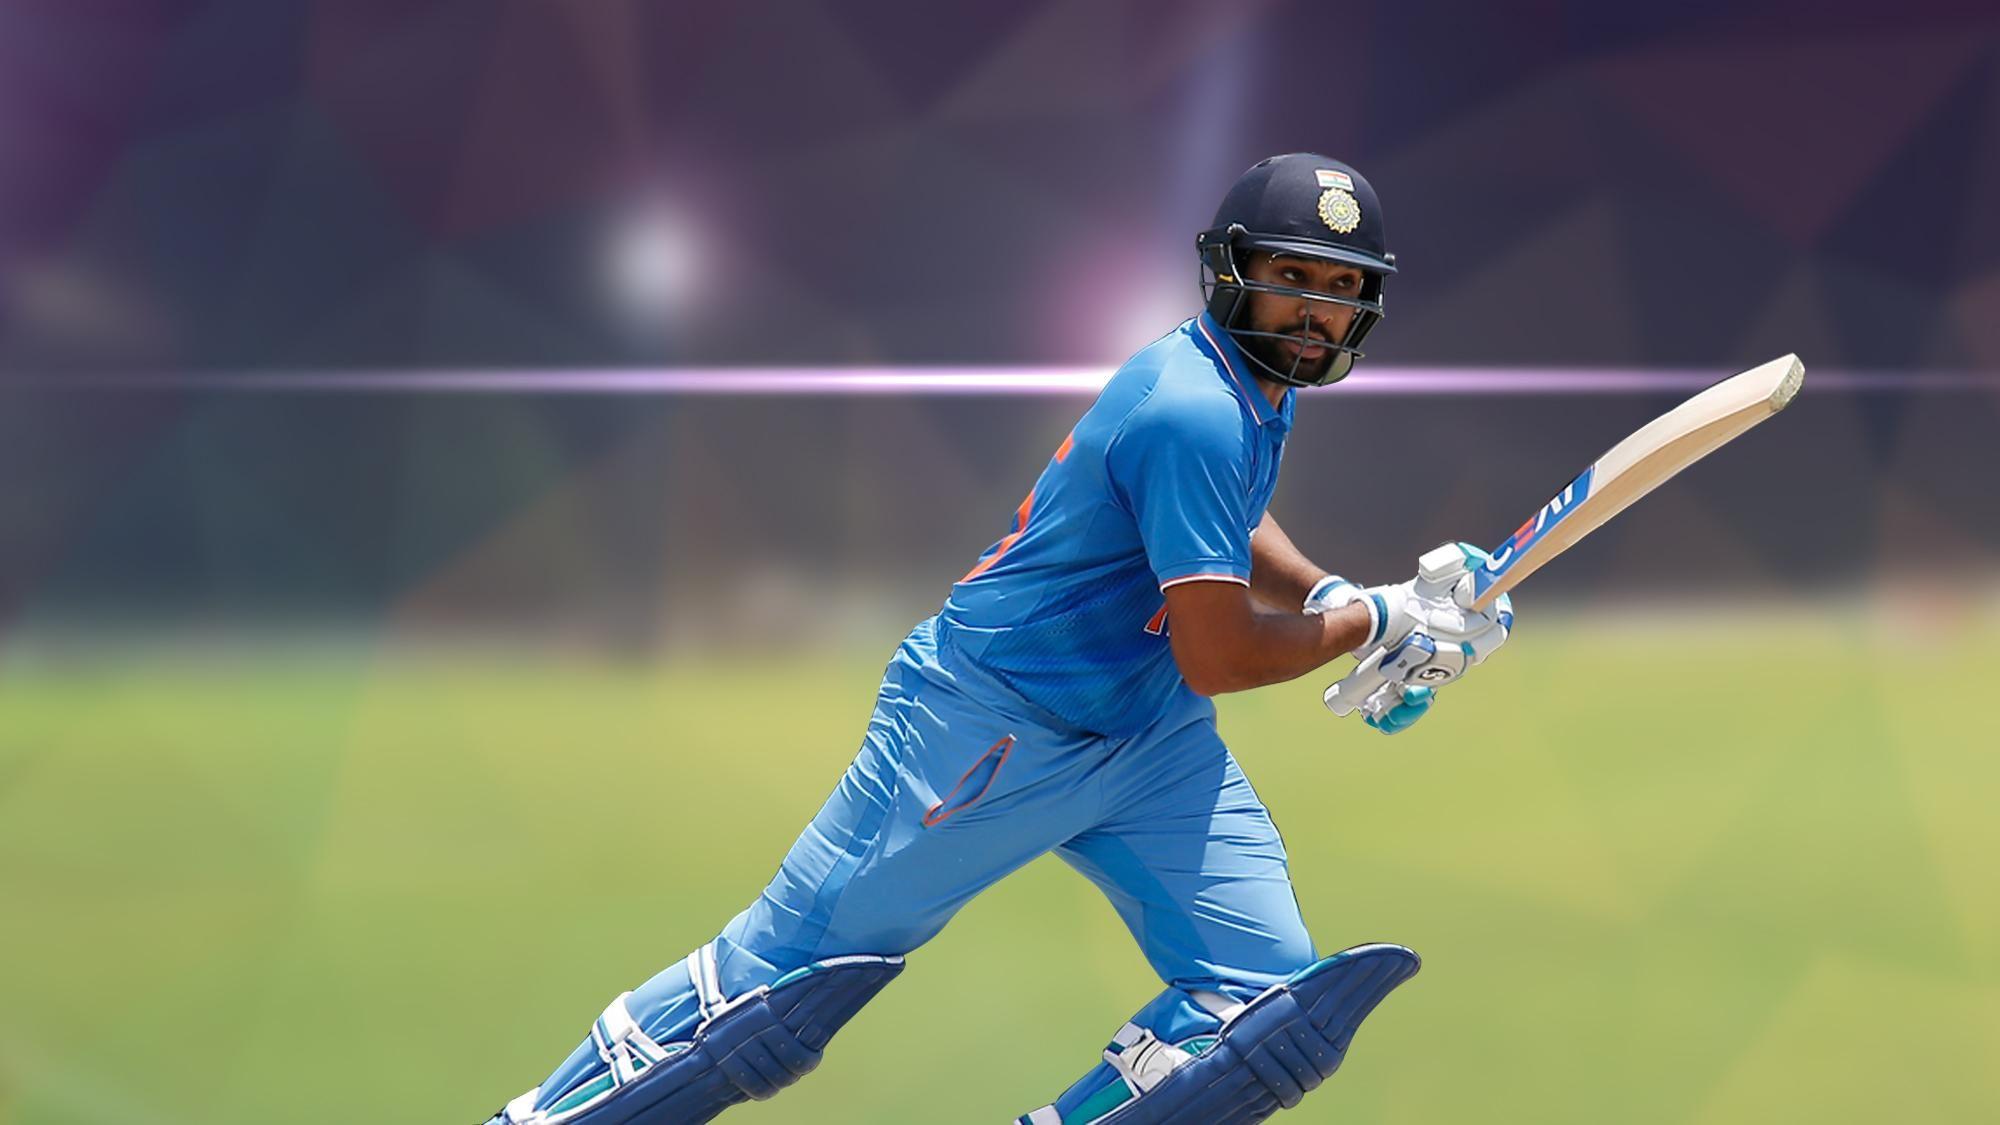 Rohit Sharma Wallpapers - Top Free Rohit Sharma Backgrounds